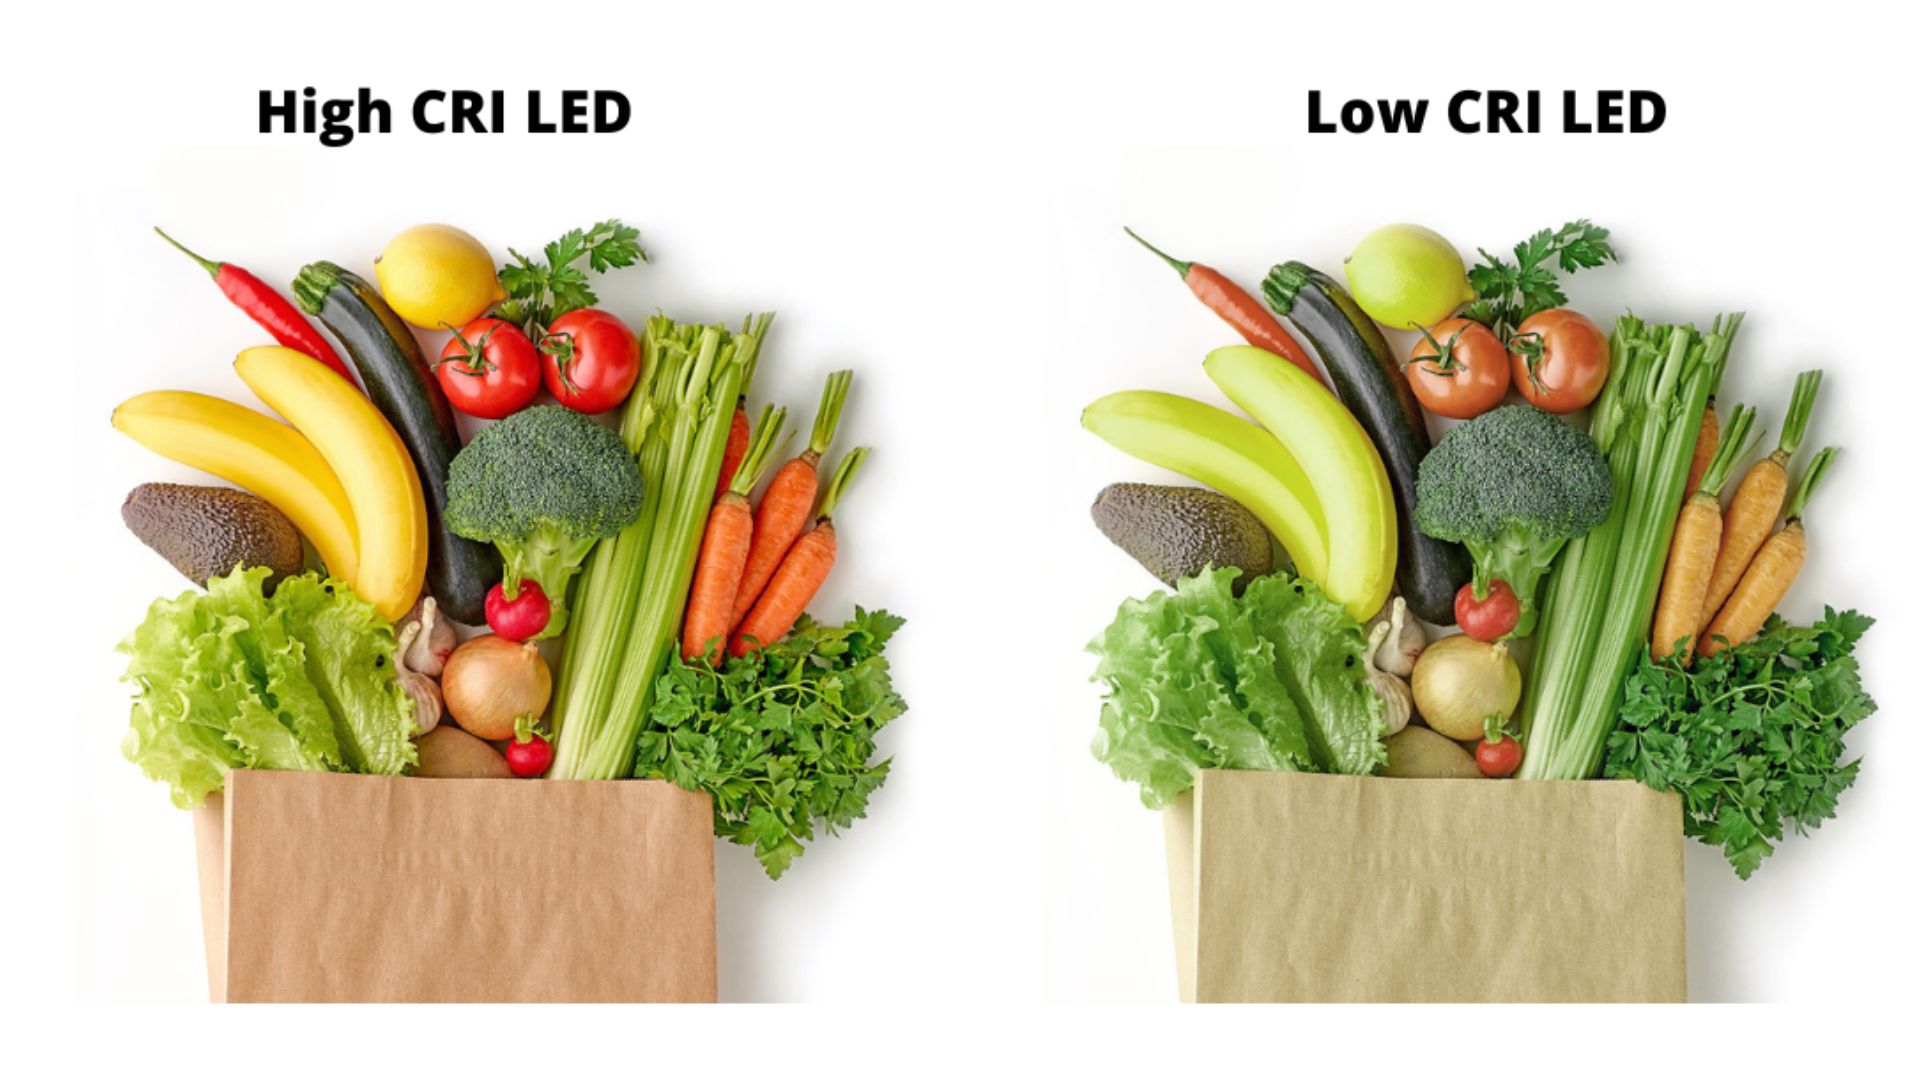 Why high CRI LED strips don't provide more lumens